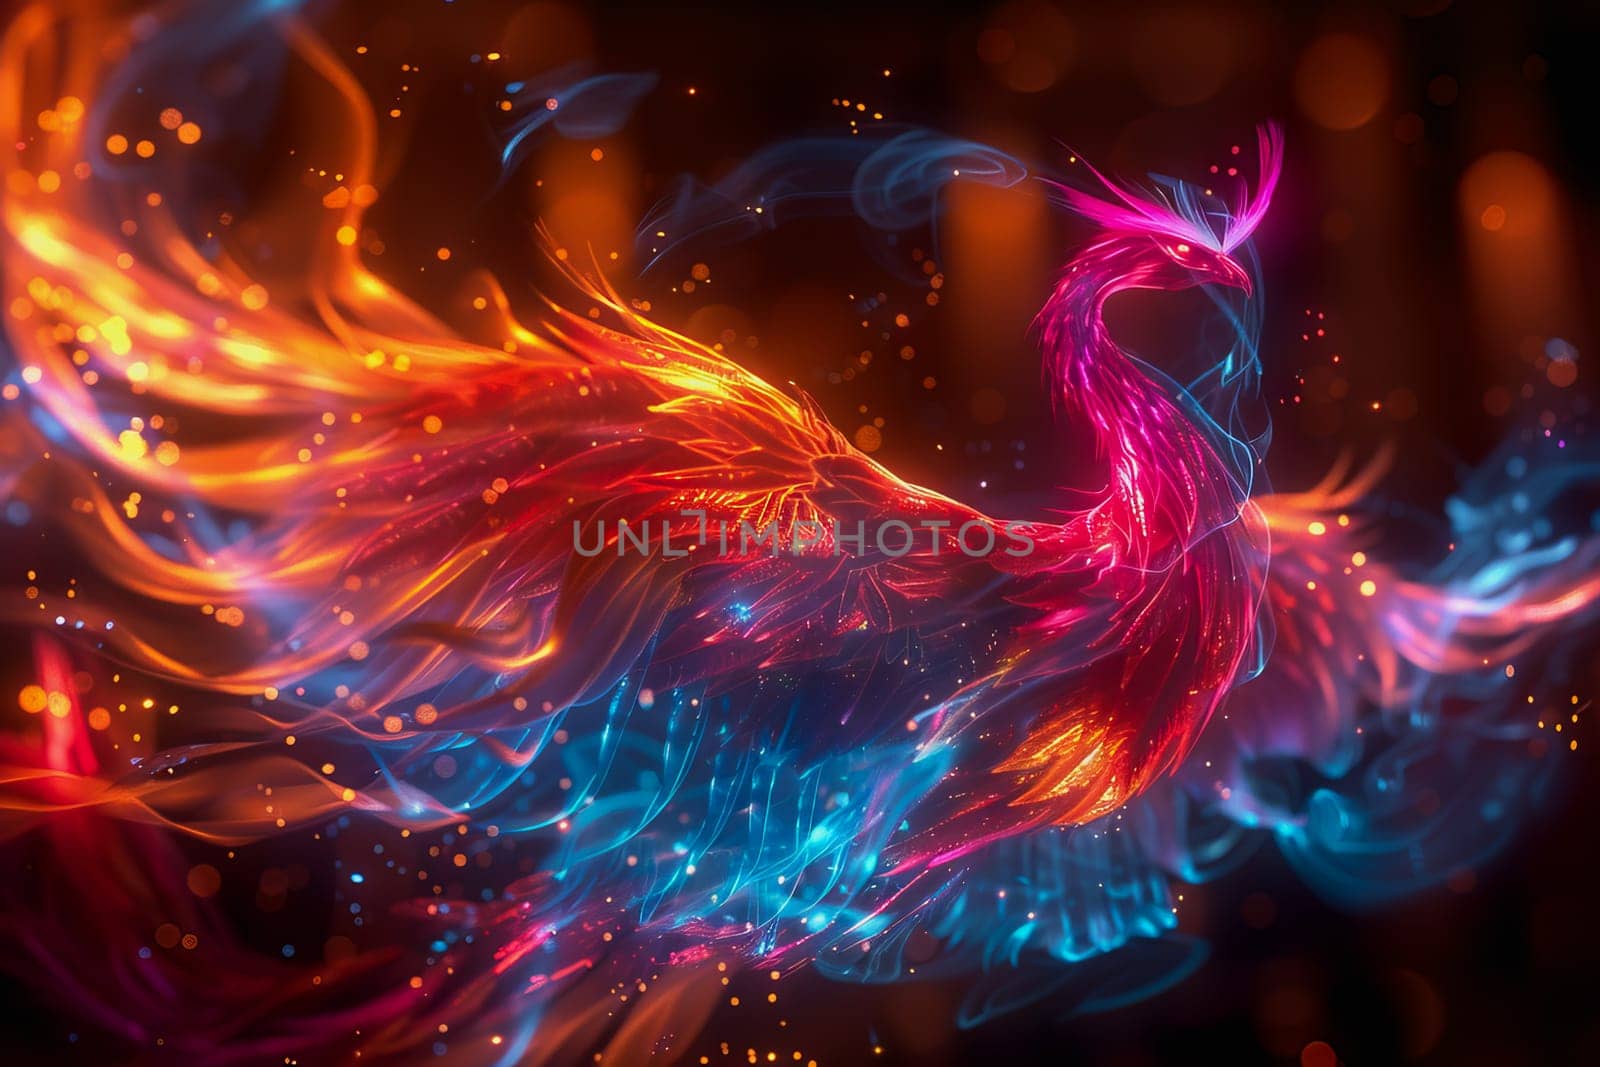 hologram of a transparent mythical phoenix glowing with ethereal radiance. by Manastrong